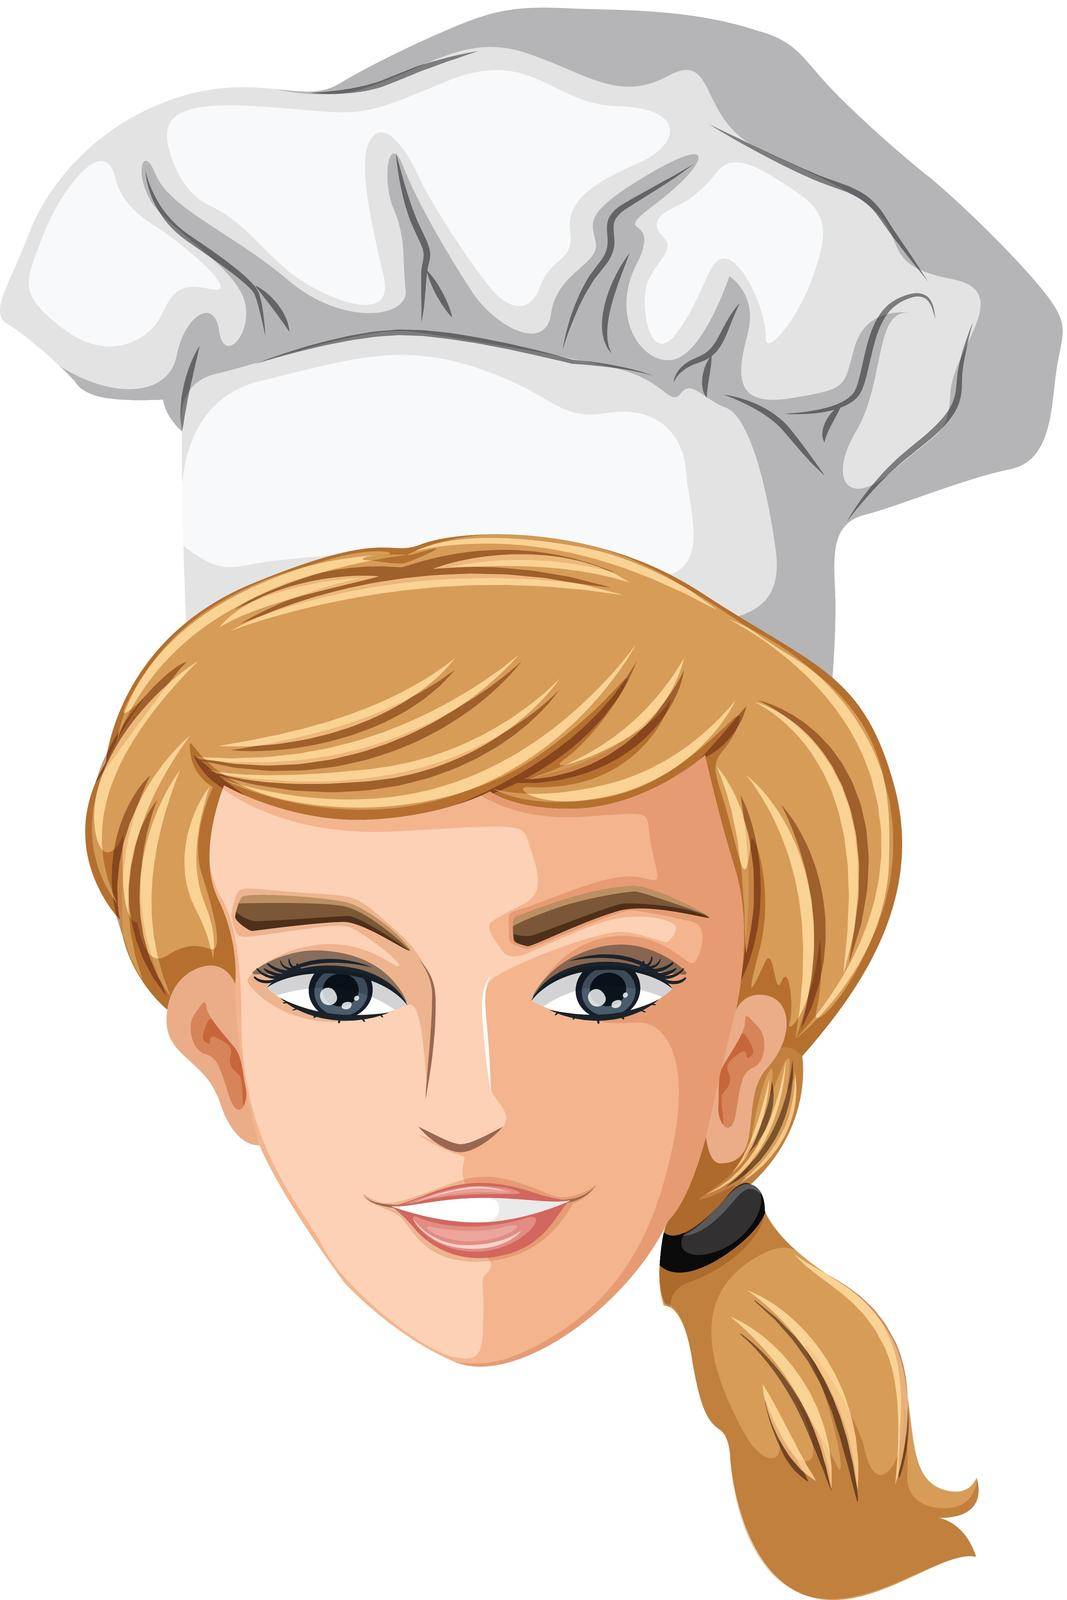 Illustration of a head of a chef on a white background